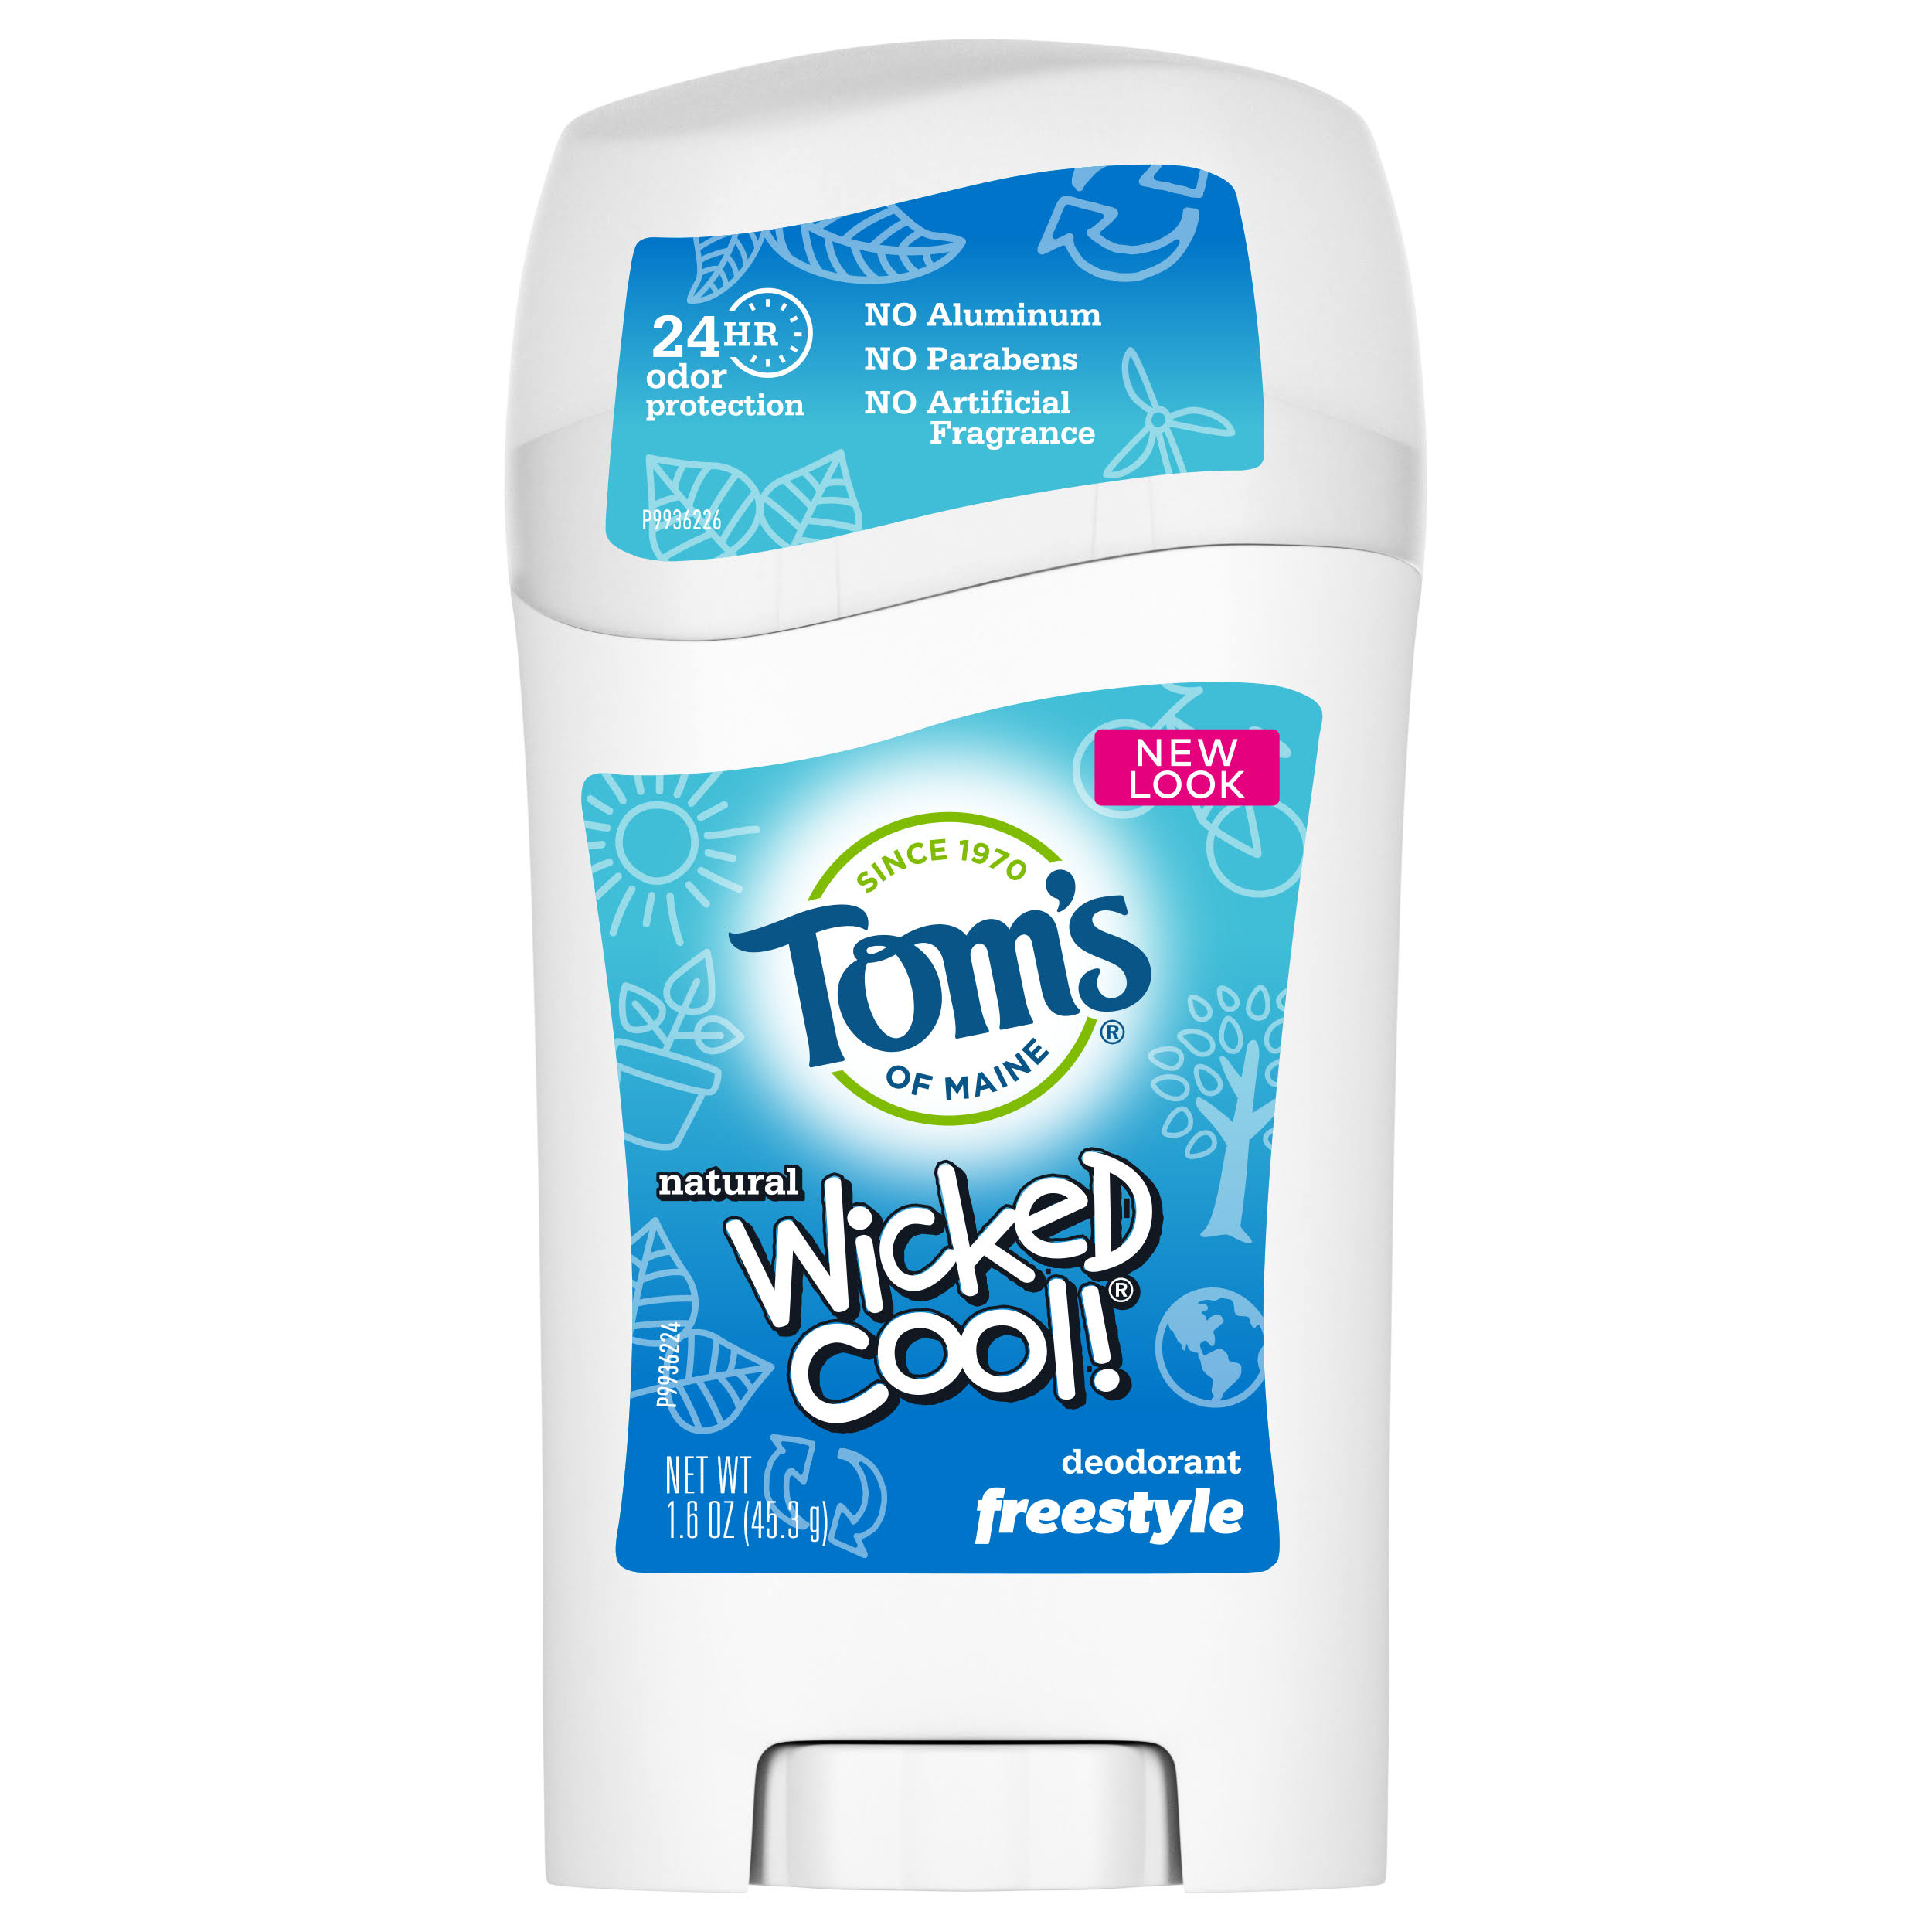 Tom's of Maine Natural Wicked Cool Deodorant Freestyle 1.6 oz.